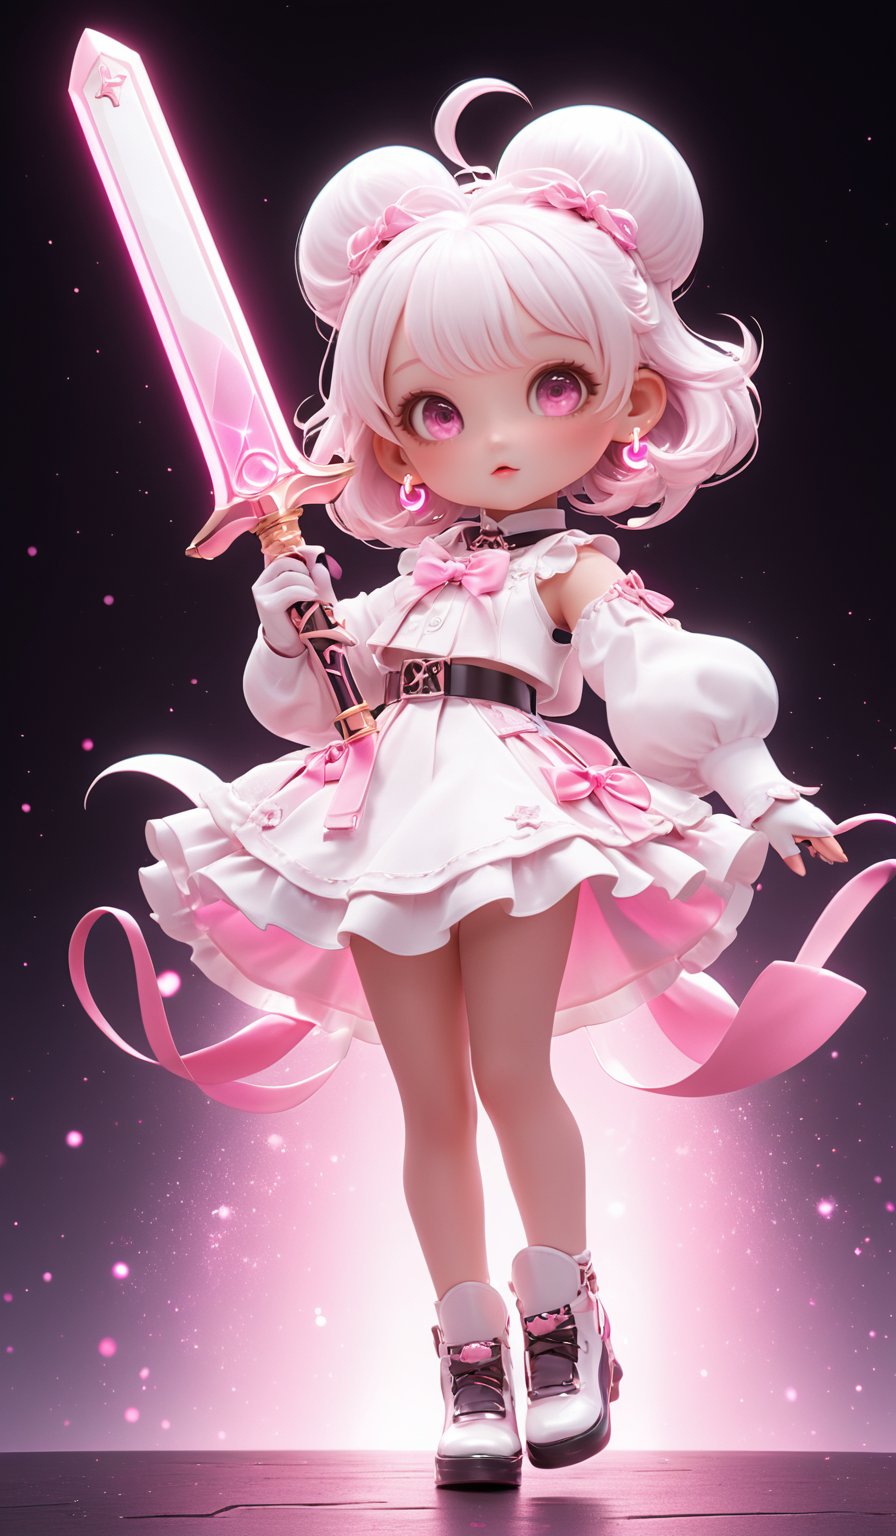 3D IP\(hubgstyle)\,
hubggirl with White Lolita outfit ,holding a glowing pink sword upwards, dynamic poses, particle effects, 

professional 3d model, anime artwork pixar, 3d style, good shine, OC rendering, highly detailed, volumetric, dramatic lighting,